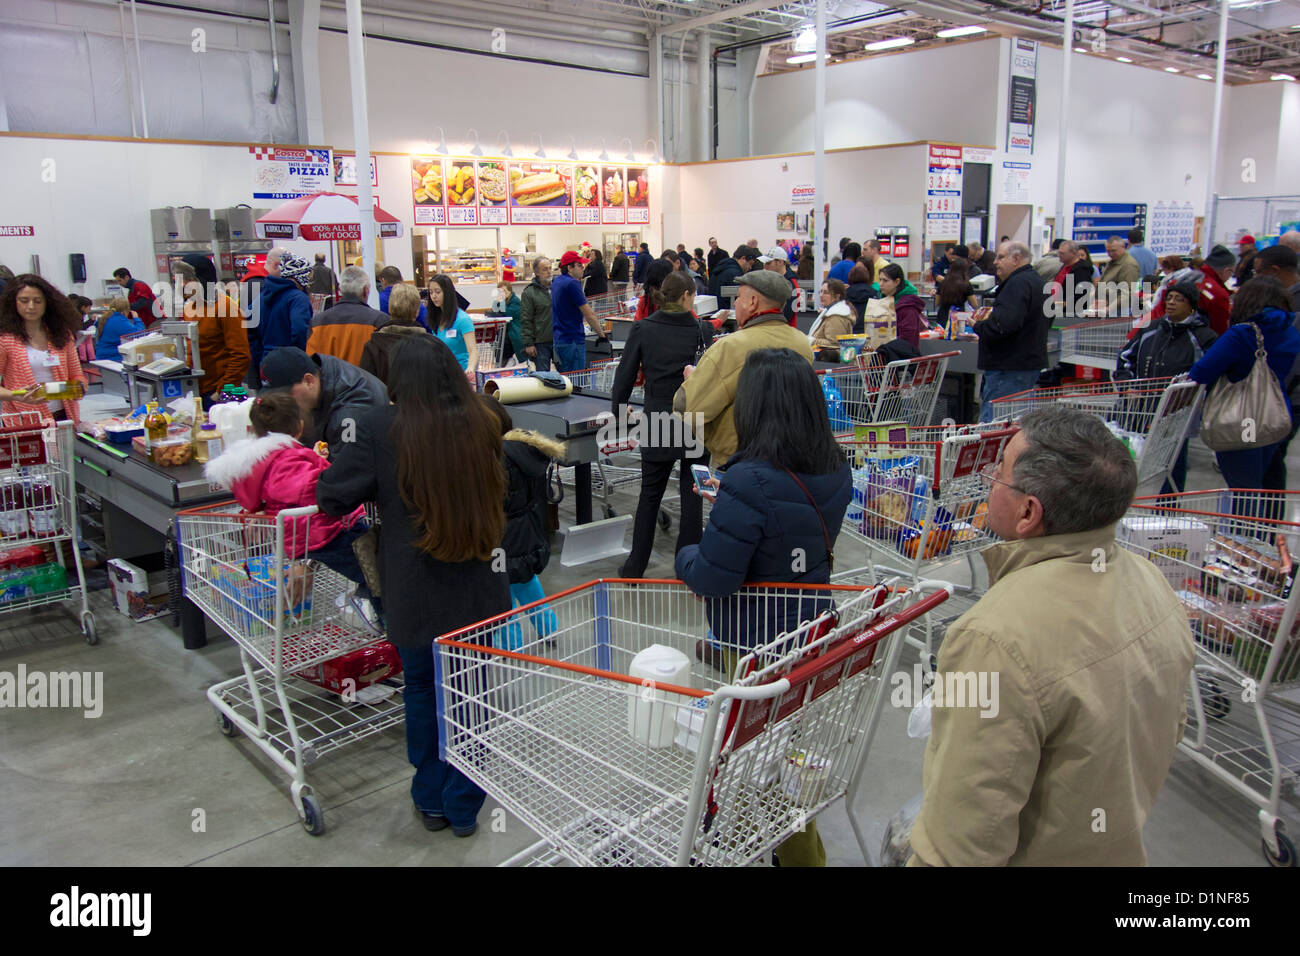 Costco-shoppers-lined-up-at-checkout-lan